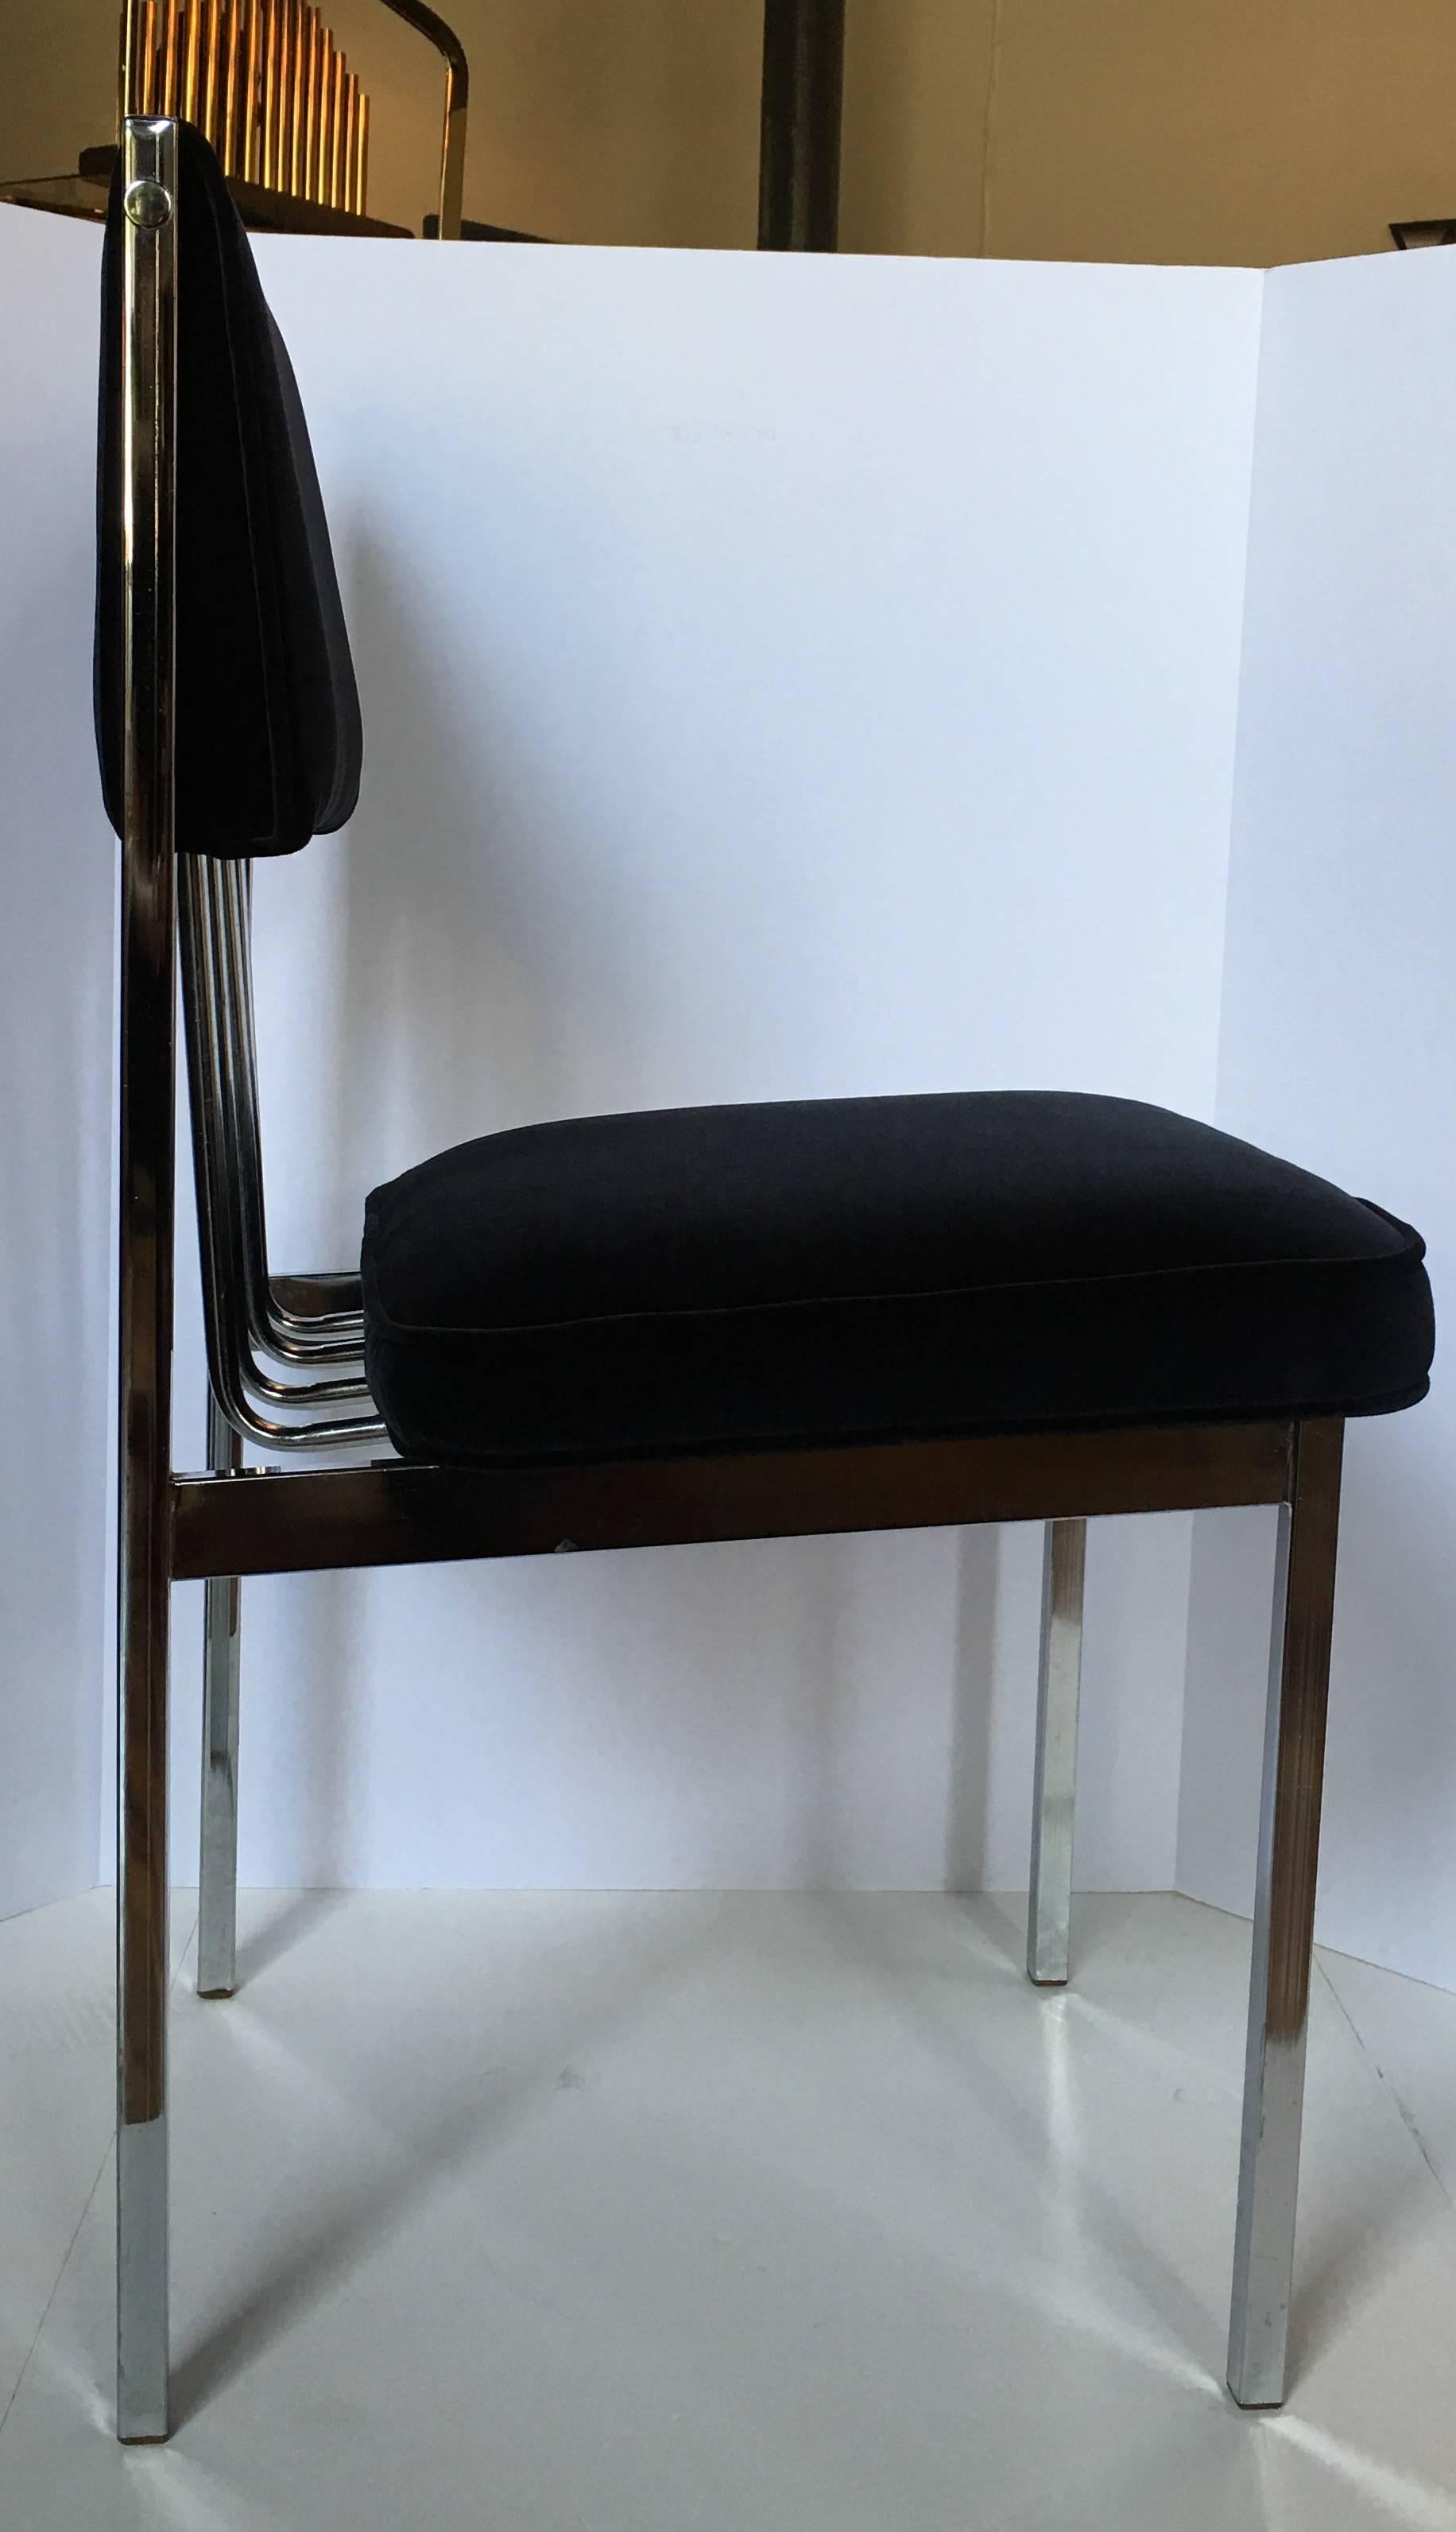 Beautiful set of four Mid-Century Modern chrome frame dining chairs featuring a sculptural tubular back design.  Newly upholstered in Italian black velvet fabric with new seat and back cushion inserts/foam.  In the style of Milo Baughman.